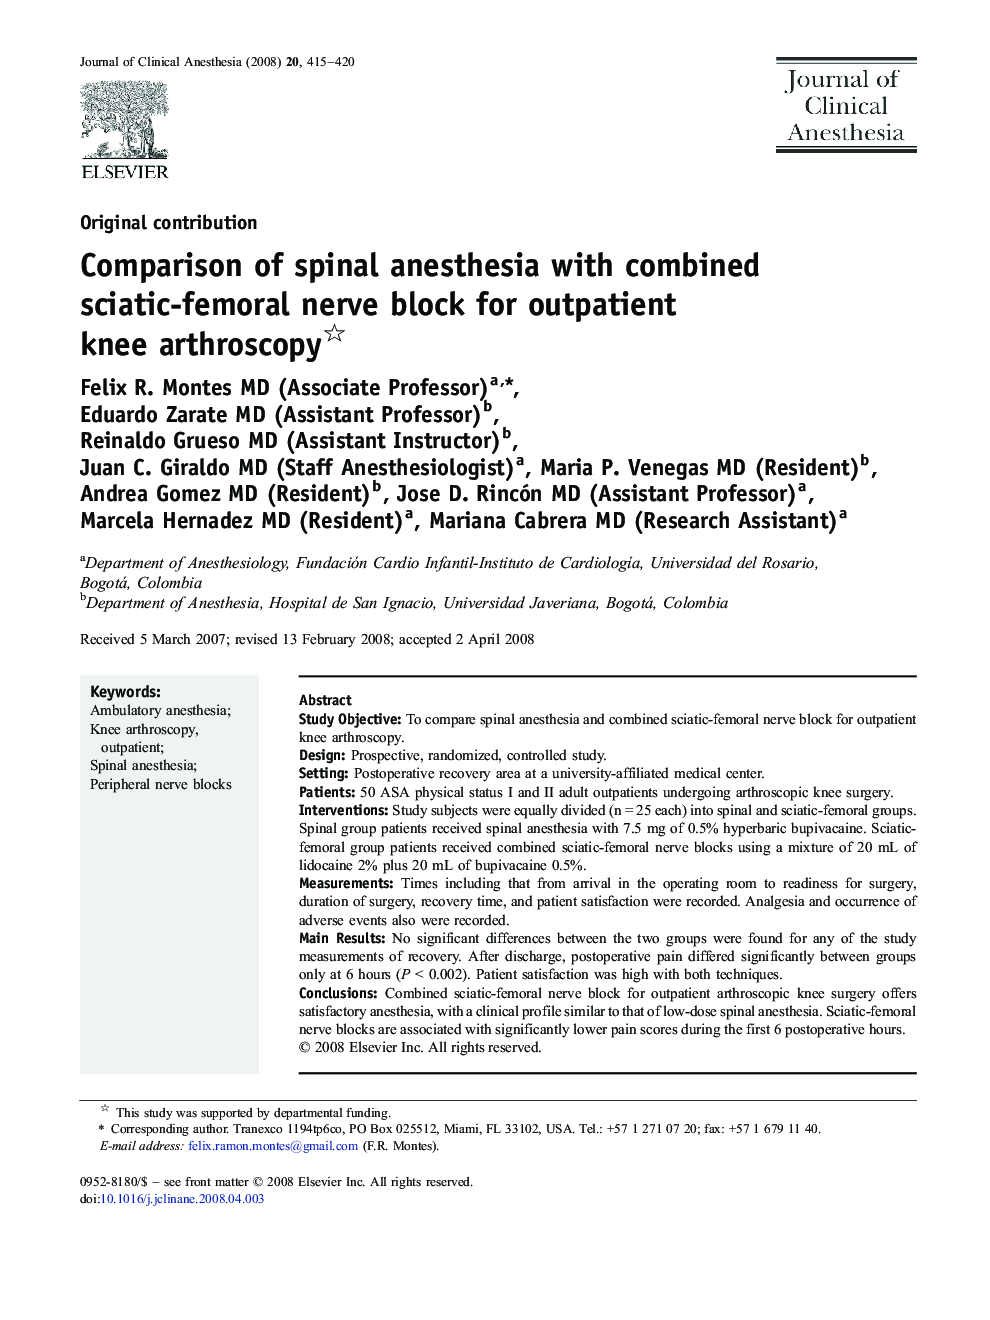 Comparison of spinal anesthesia with combined sciatic-femoral nerve block for outpatient knee arthroscopy 